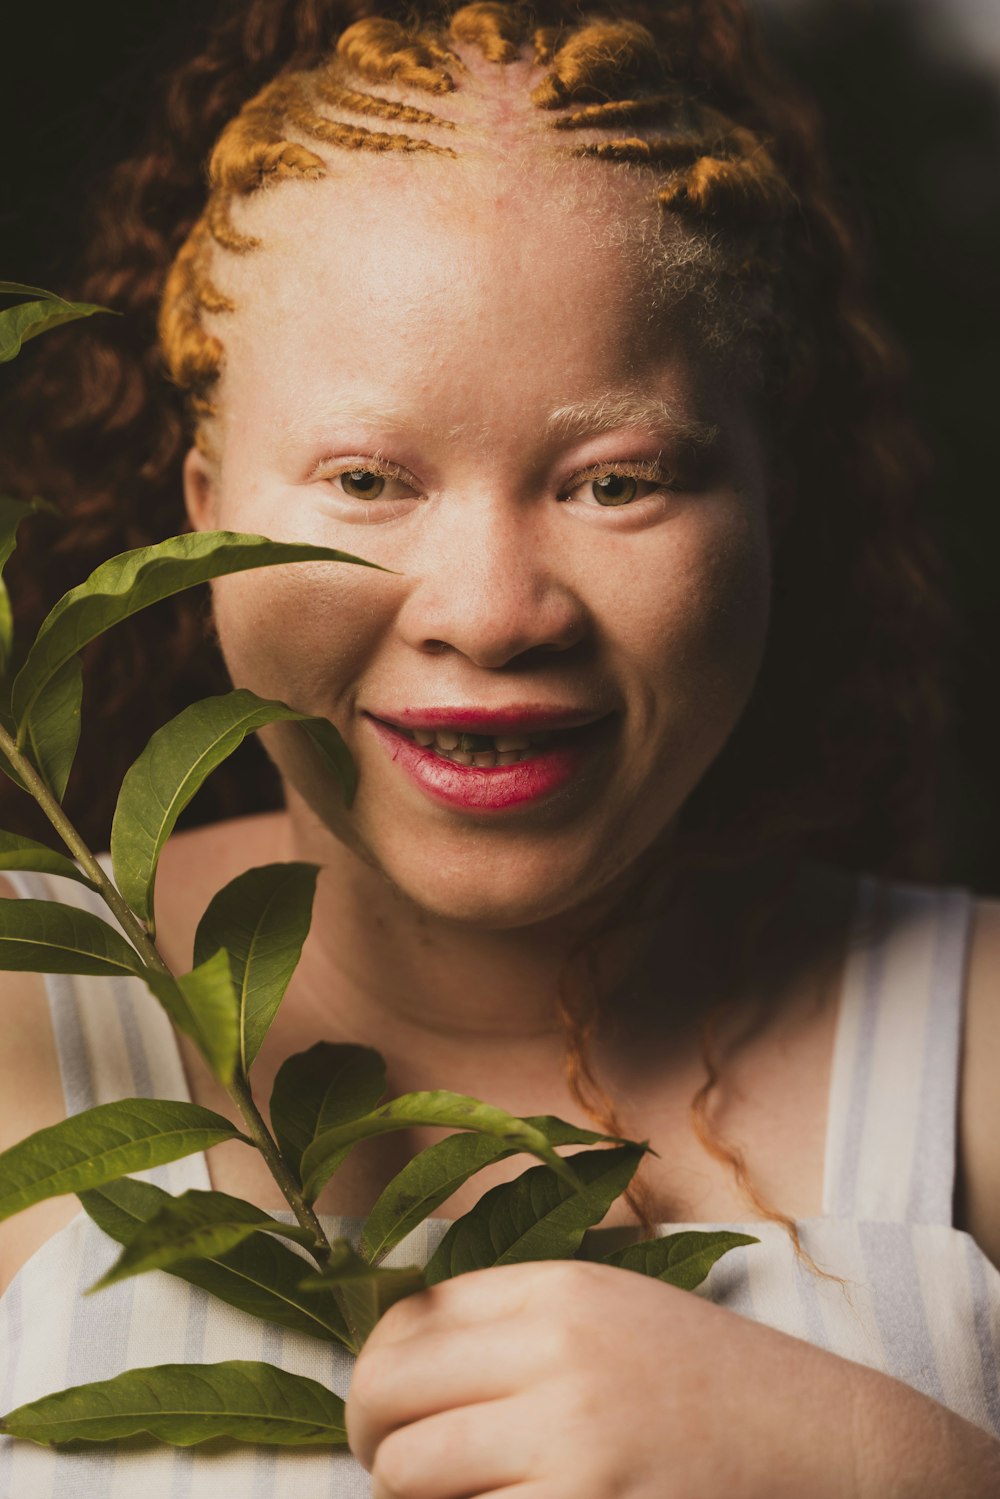 a woman with red lipstick holding a plant